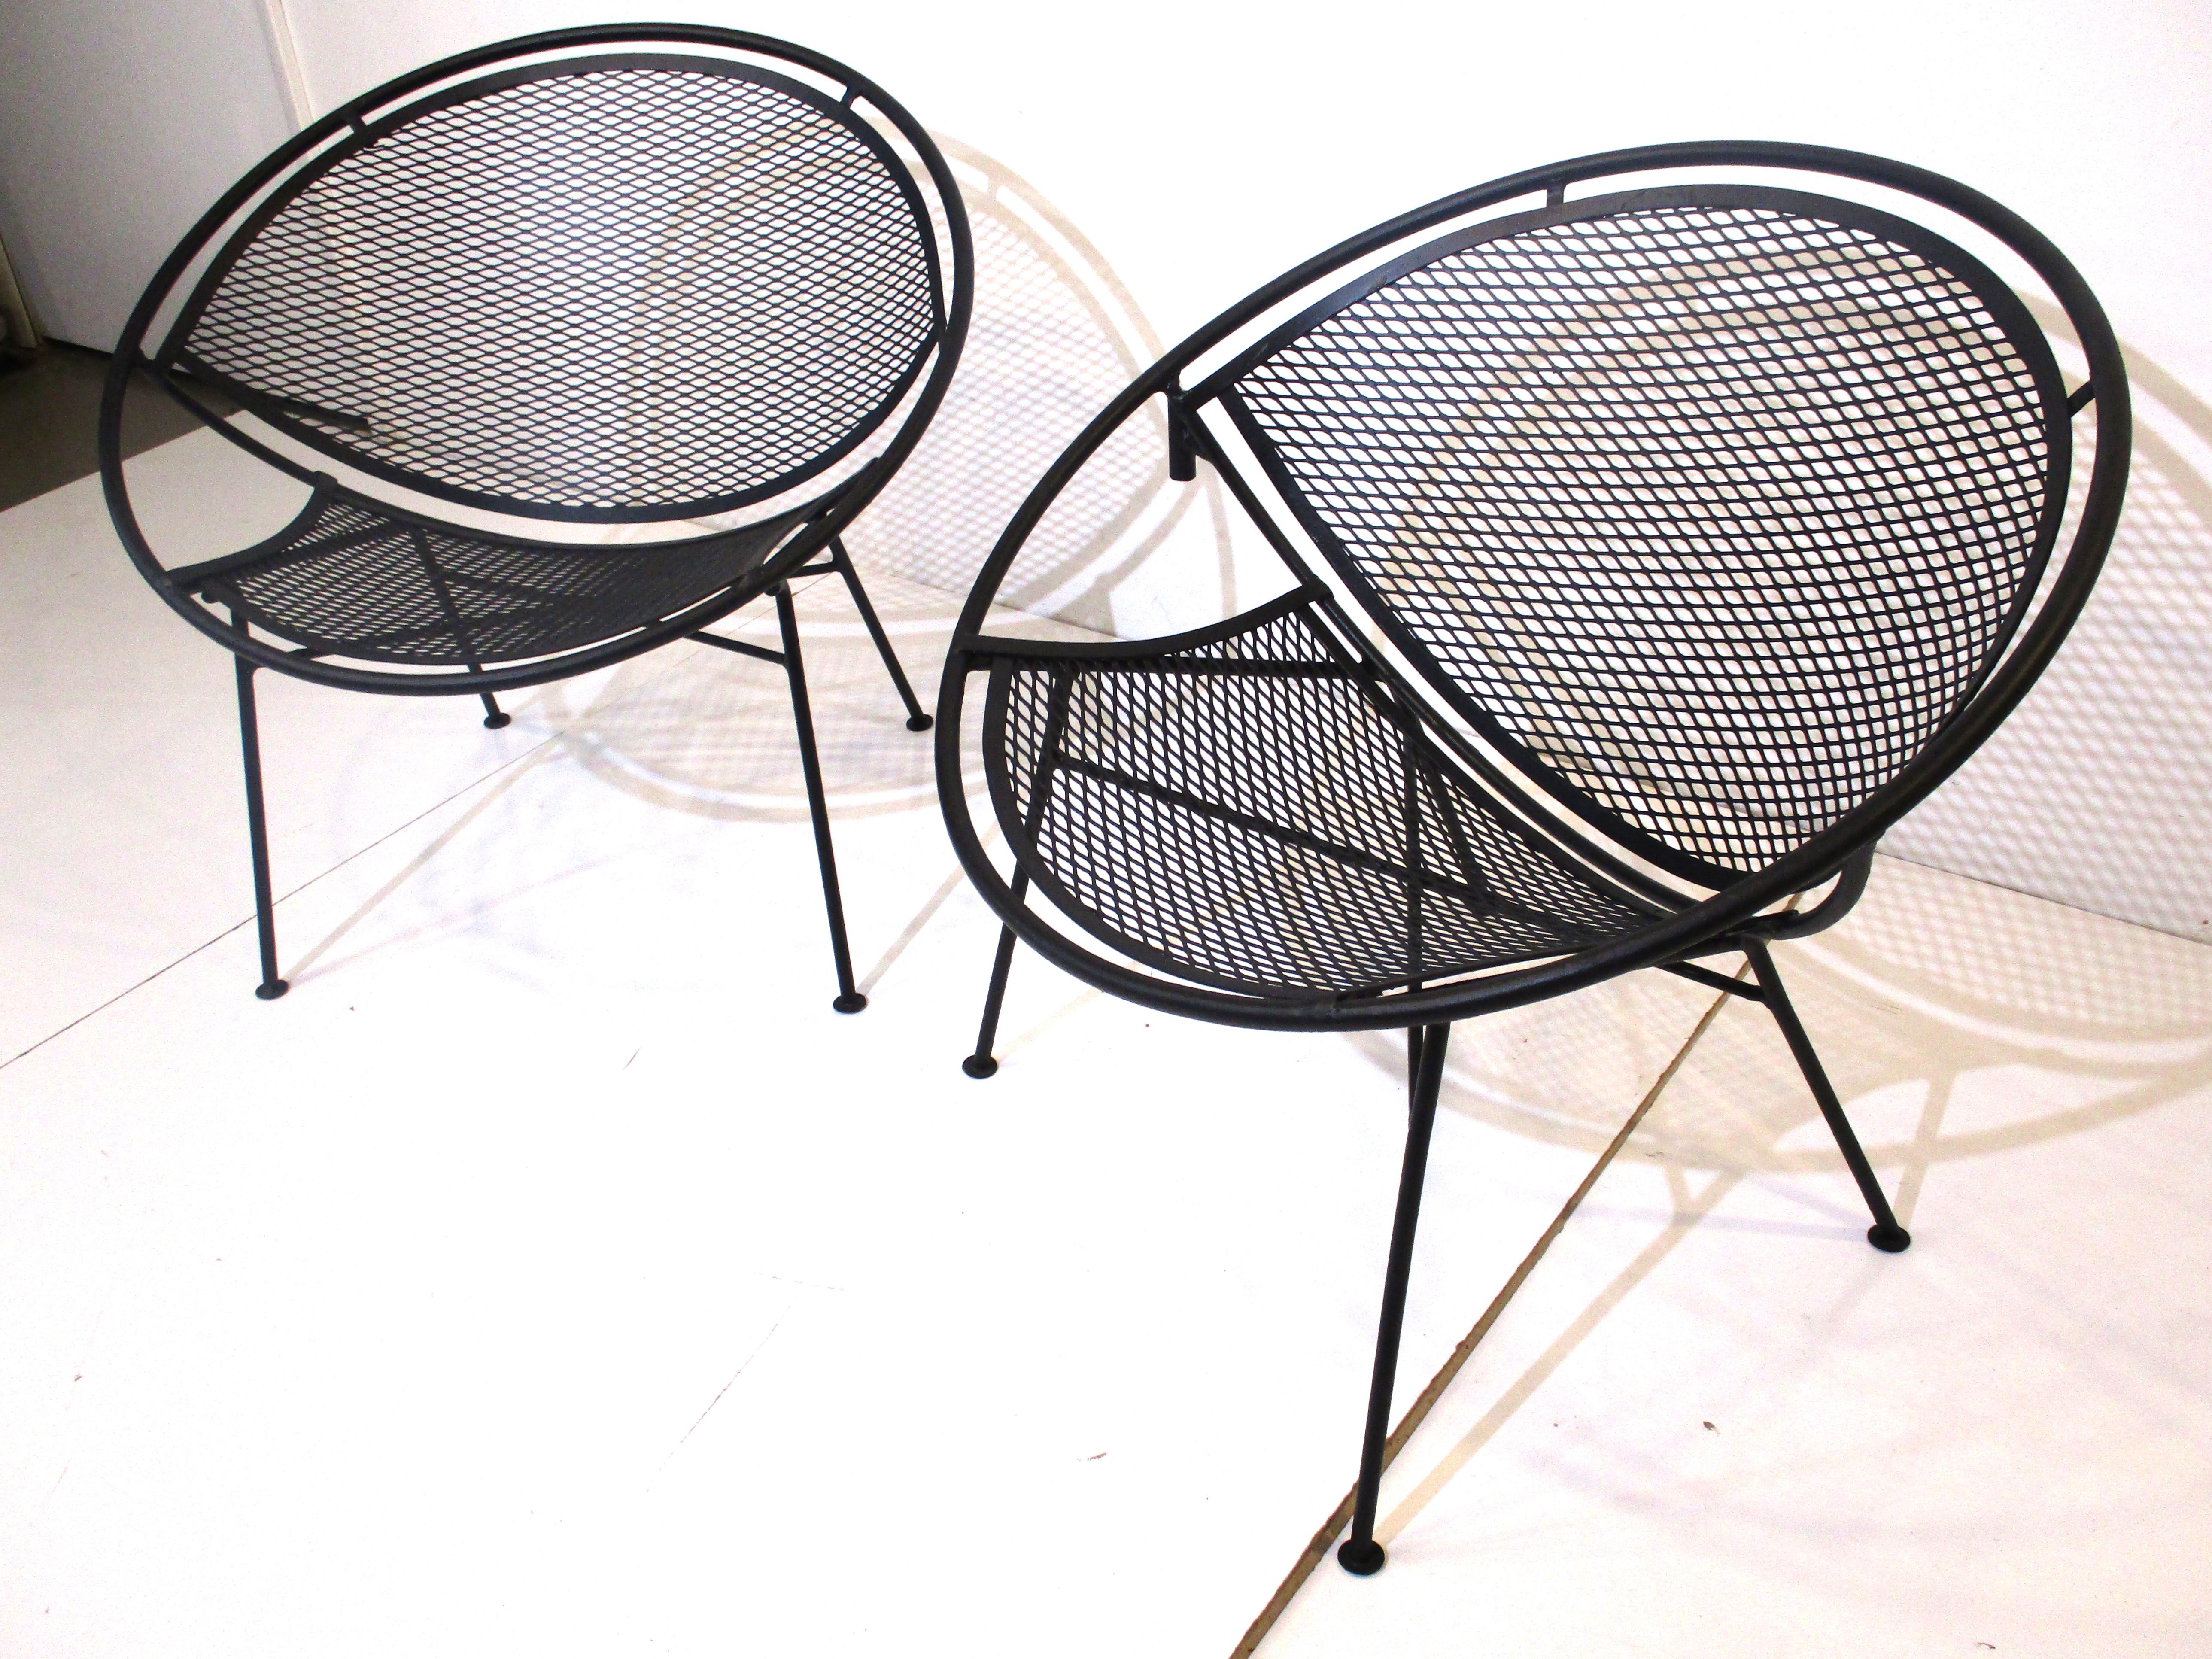 A pair of satin black Radar wrought iron lounge chairs designed by Maurizio Tempestini. The perfect Midcentury chairs for your patio or three seasons room giving you maximum comfort are well crafted and sturdy, manufactured by John Salterini.